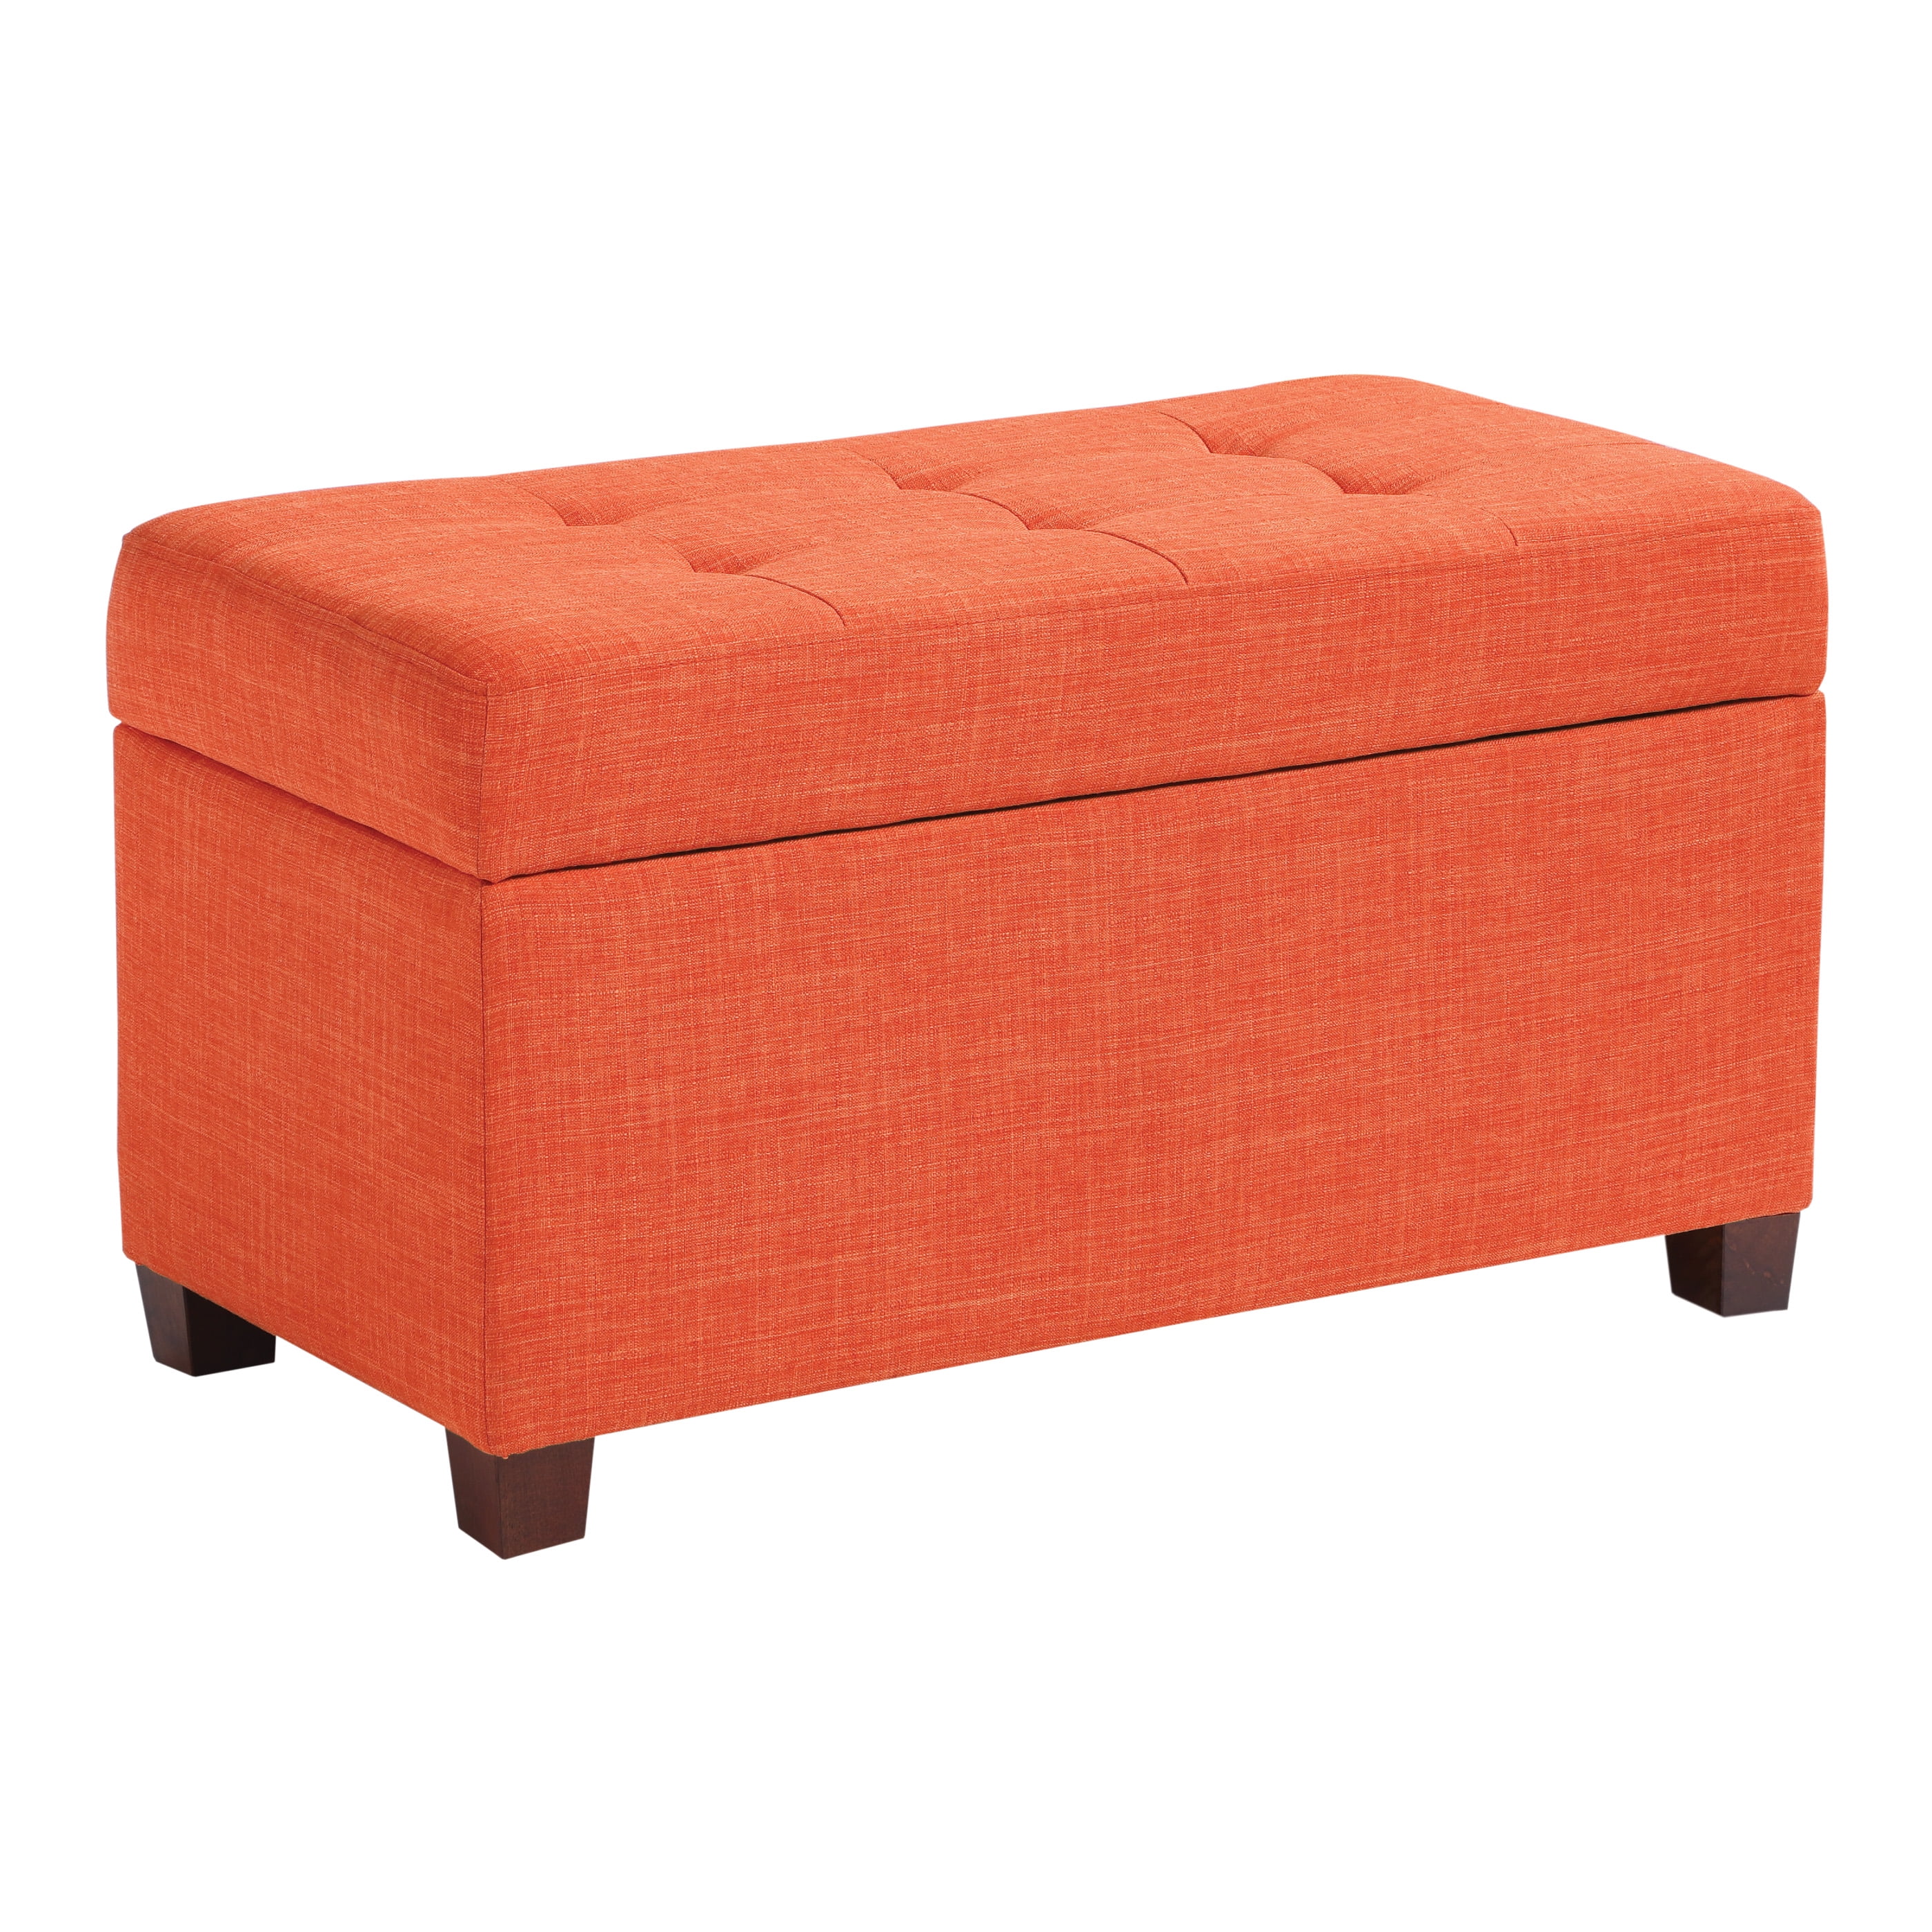 Large Fabric Footstool in wine/ light red storage box/ottoman Brand new 